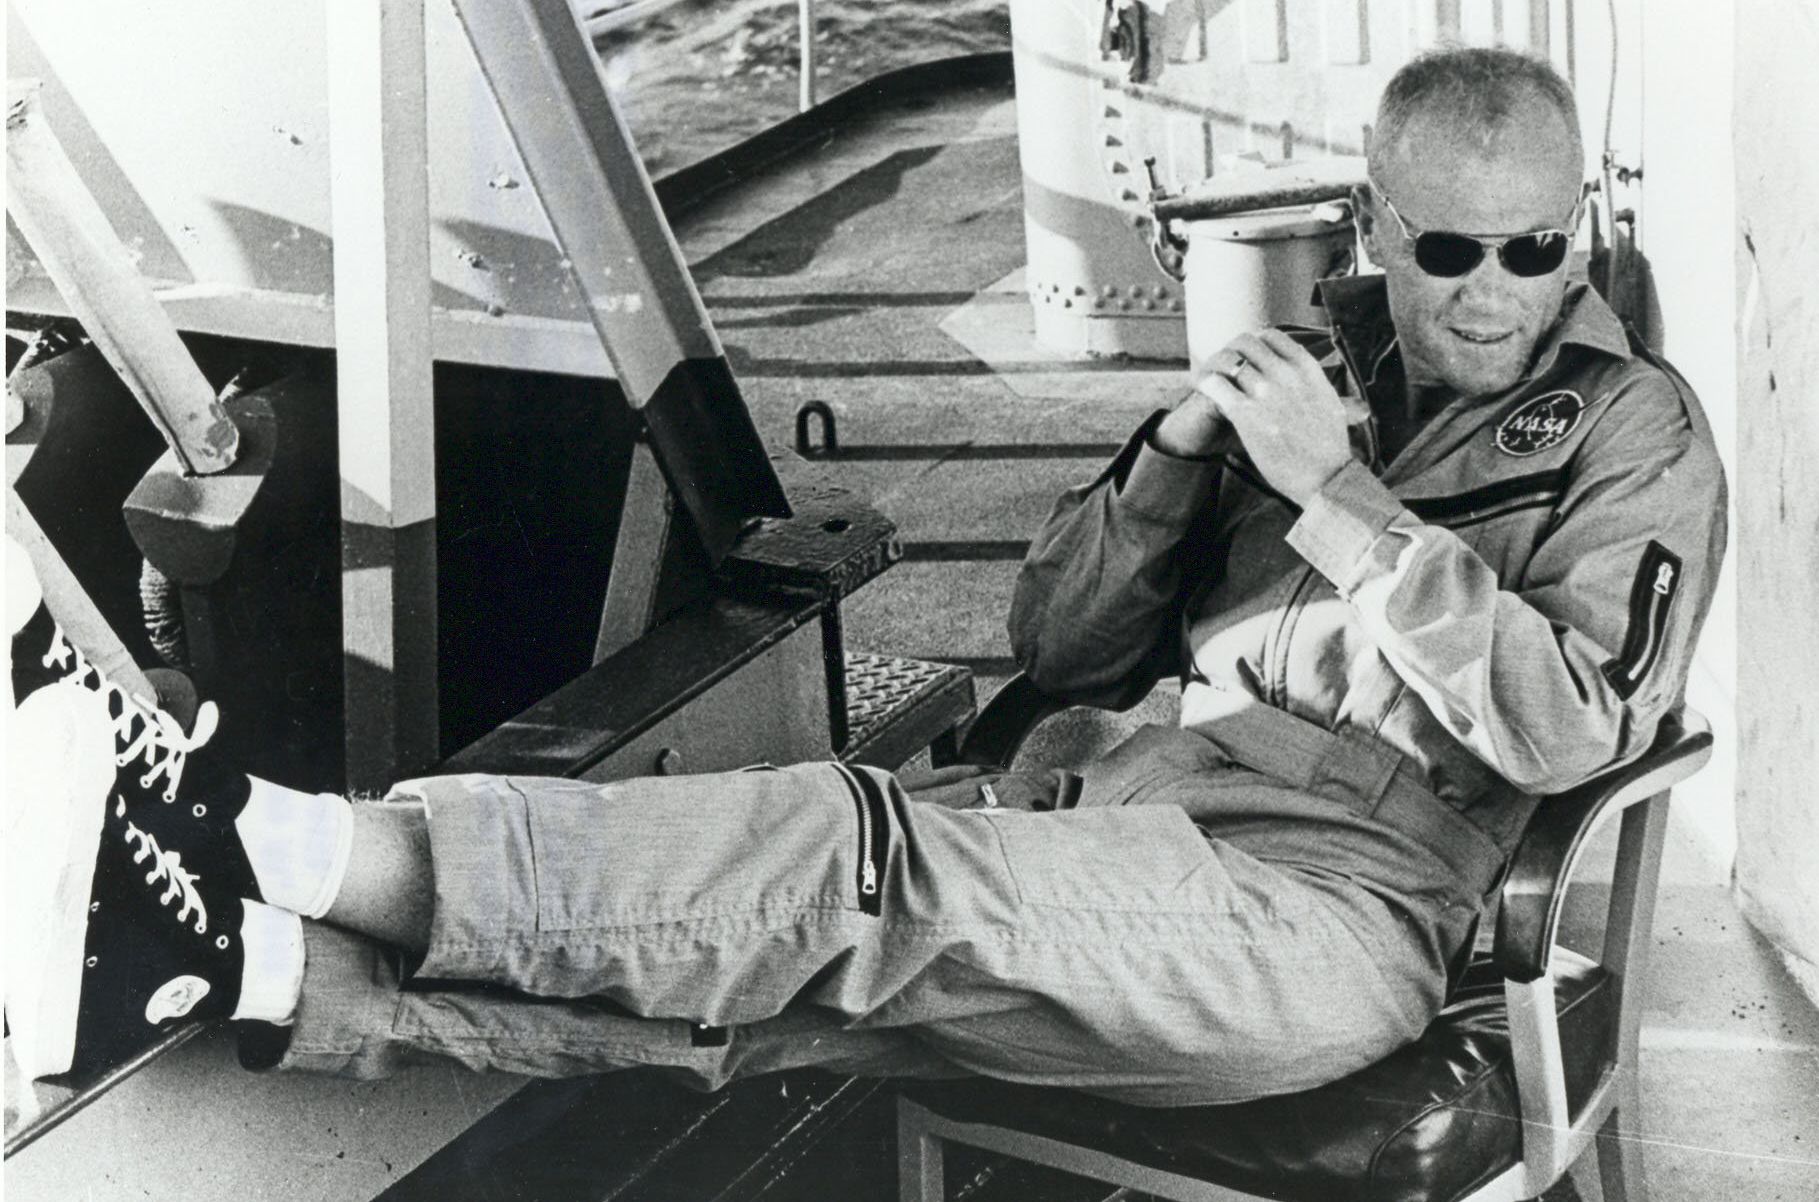 Glenn relaxes on the deck of&nbsp;the USS Noa after his historic&nbsp;space flight.